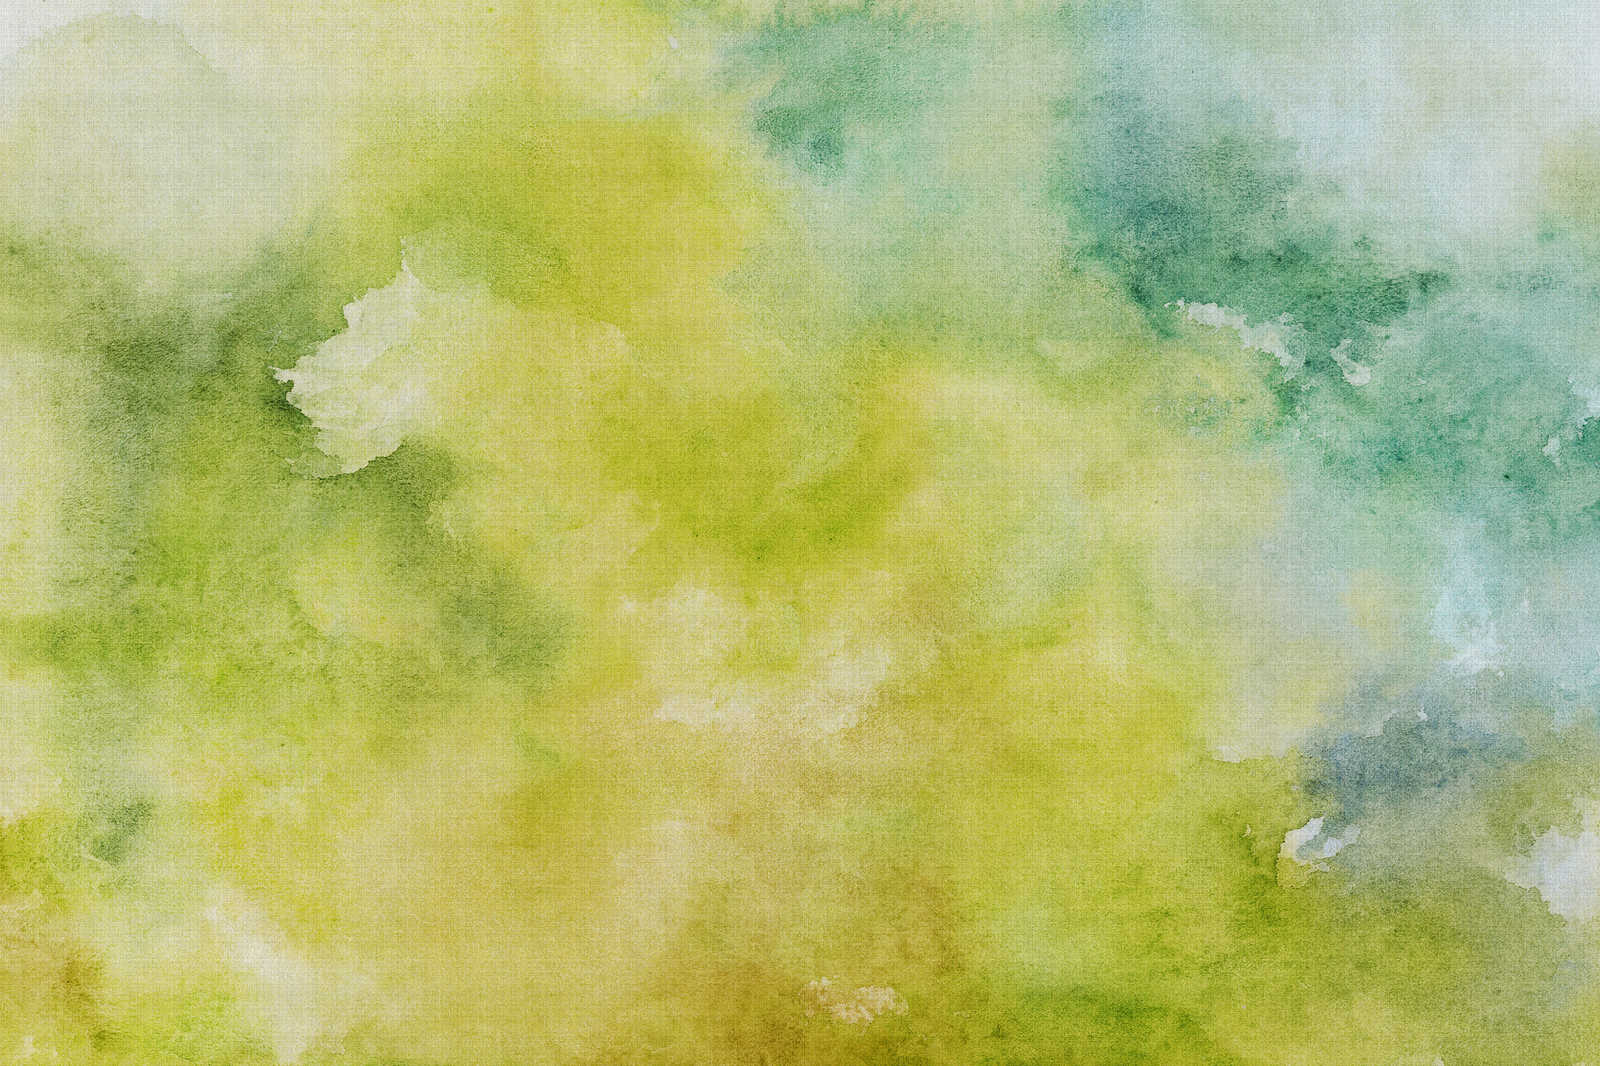             Watercolours 3 - Green watercolour motif as canvas picture in natural linen look - 1.20 m x 0.80 m
        